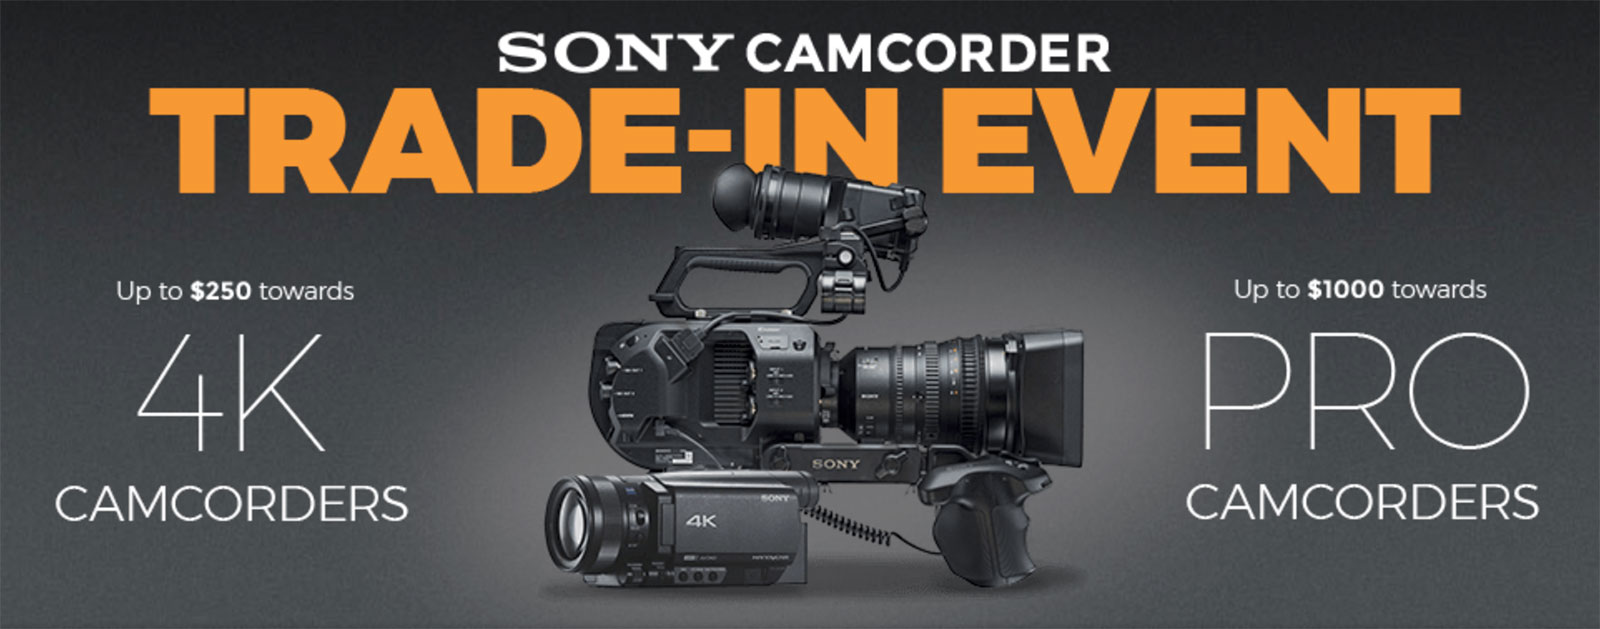 Sony-Pro-4K-Camcorder-Trade-in